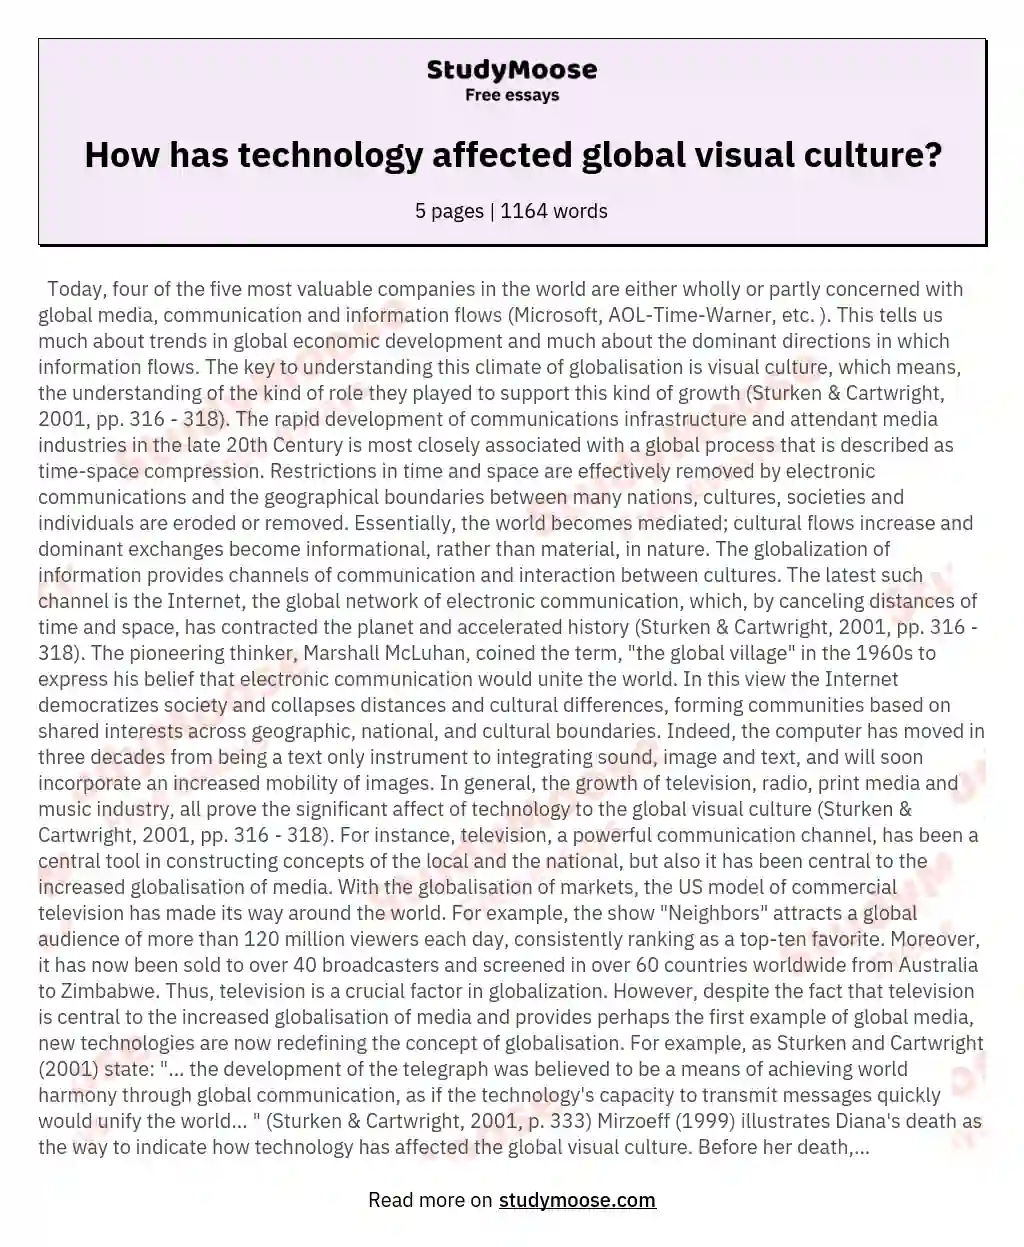 How has technology affected global visual culture? essay